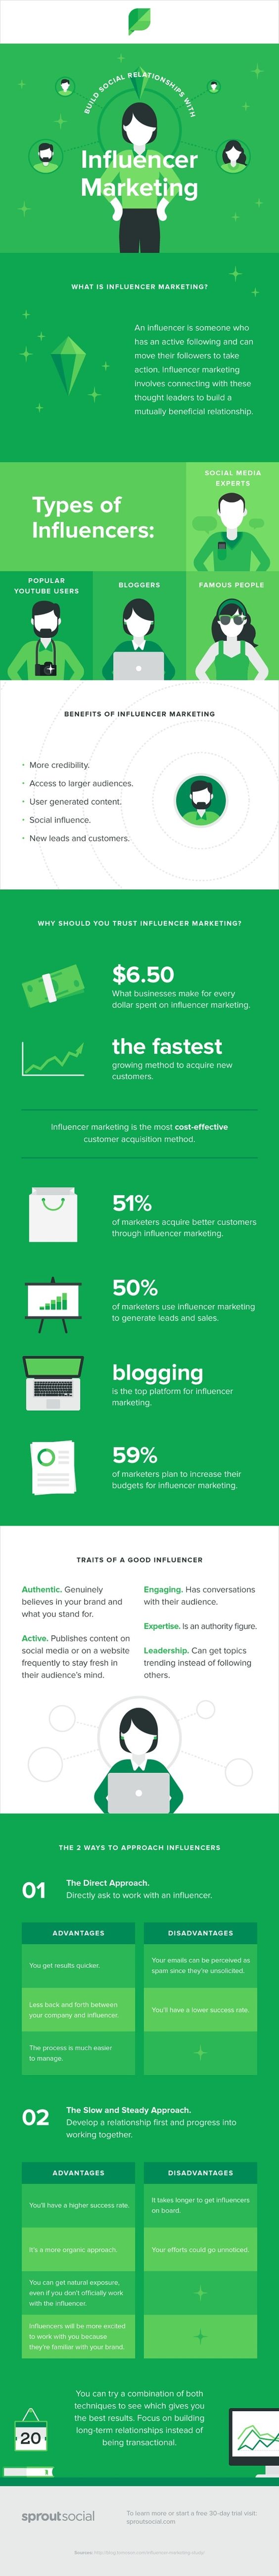 Build Social Relationships With Influencer Marketing [Infographic